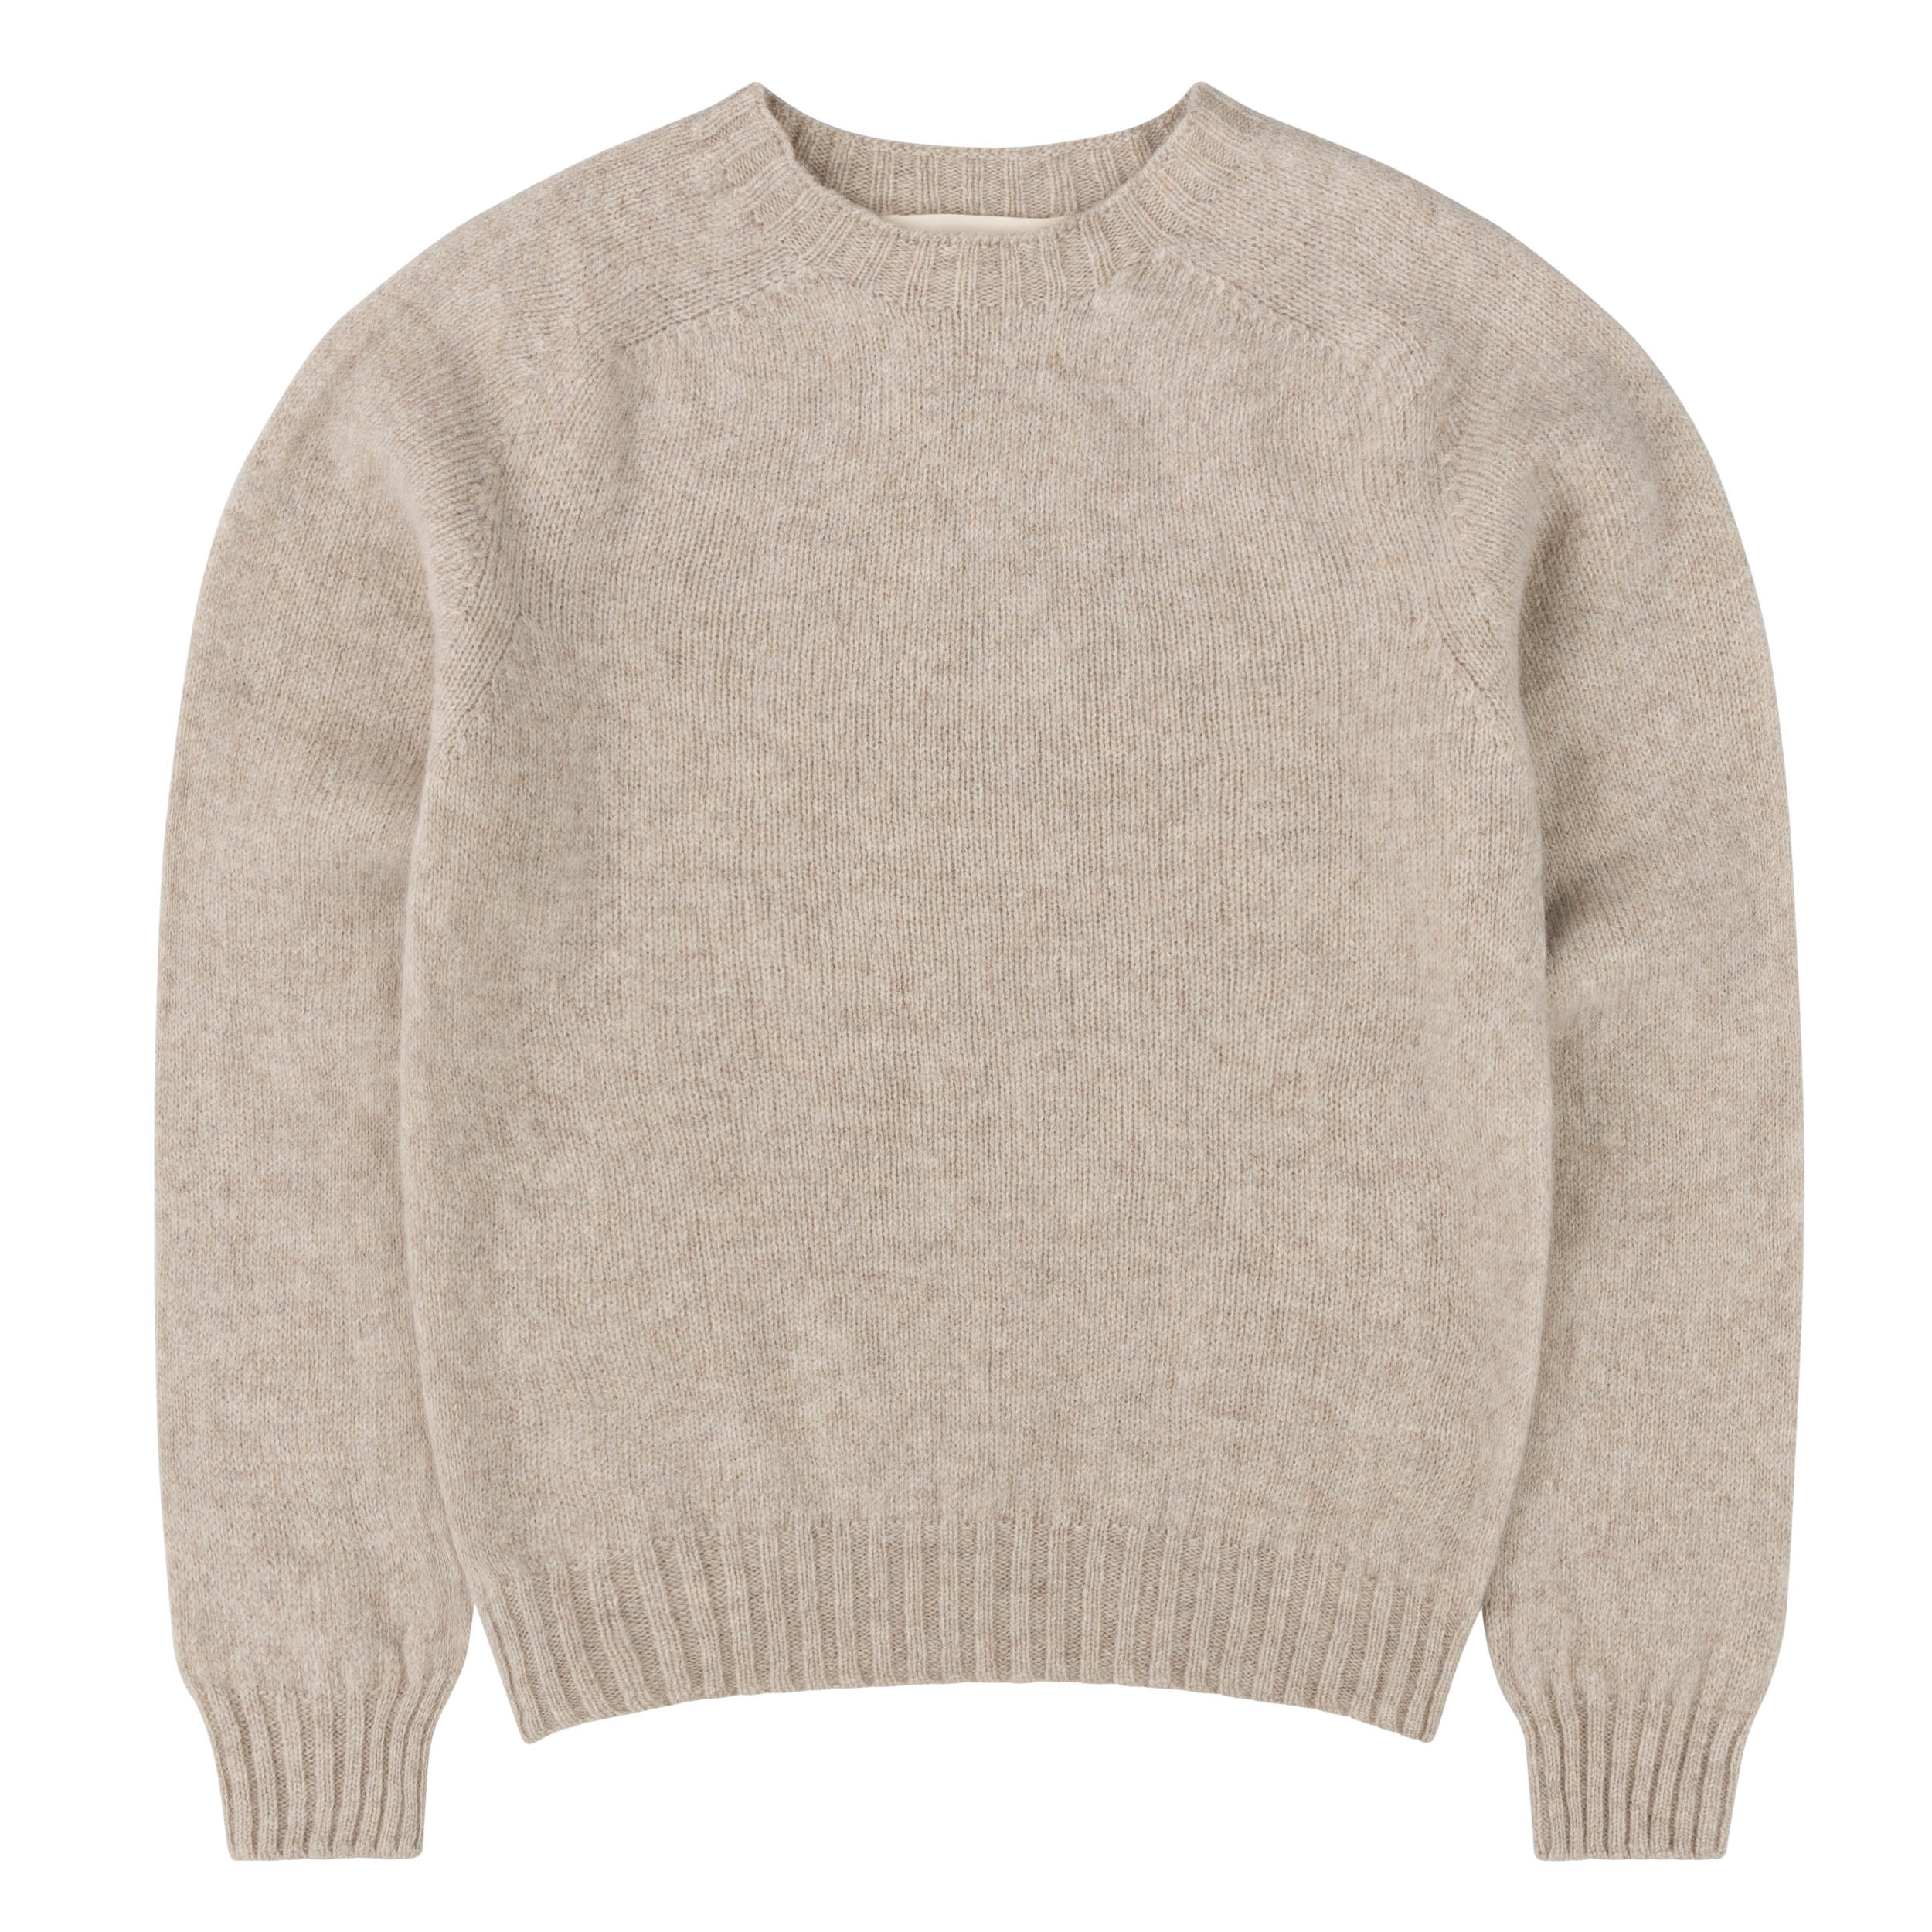 Carrier Company Shetland Lambswool Jumper in Putty